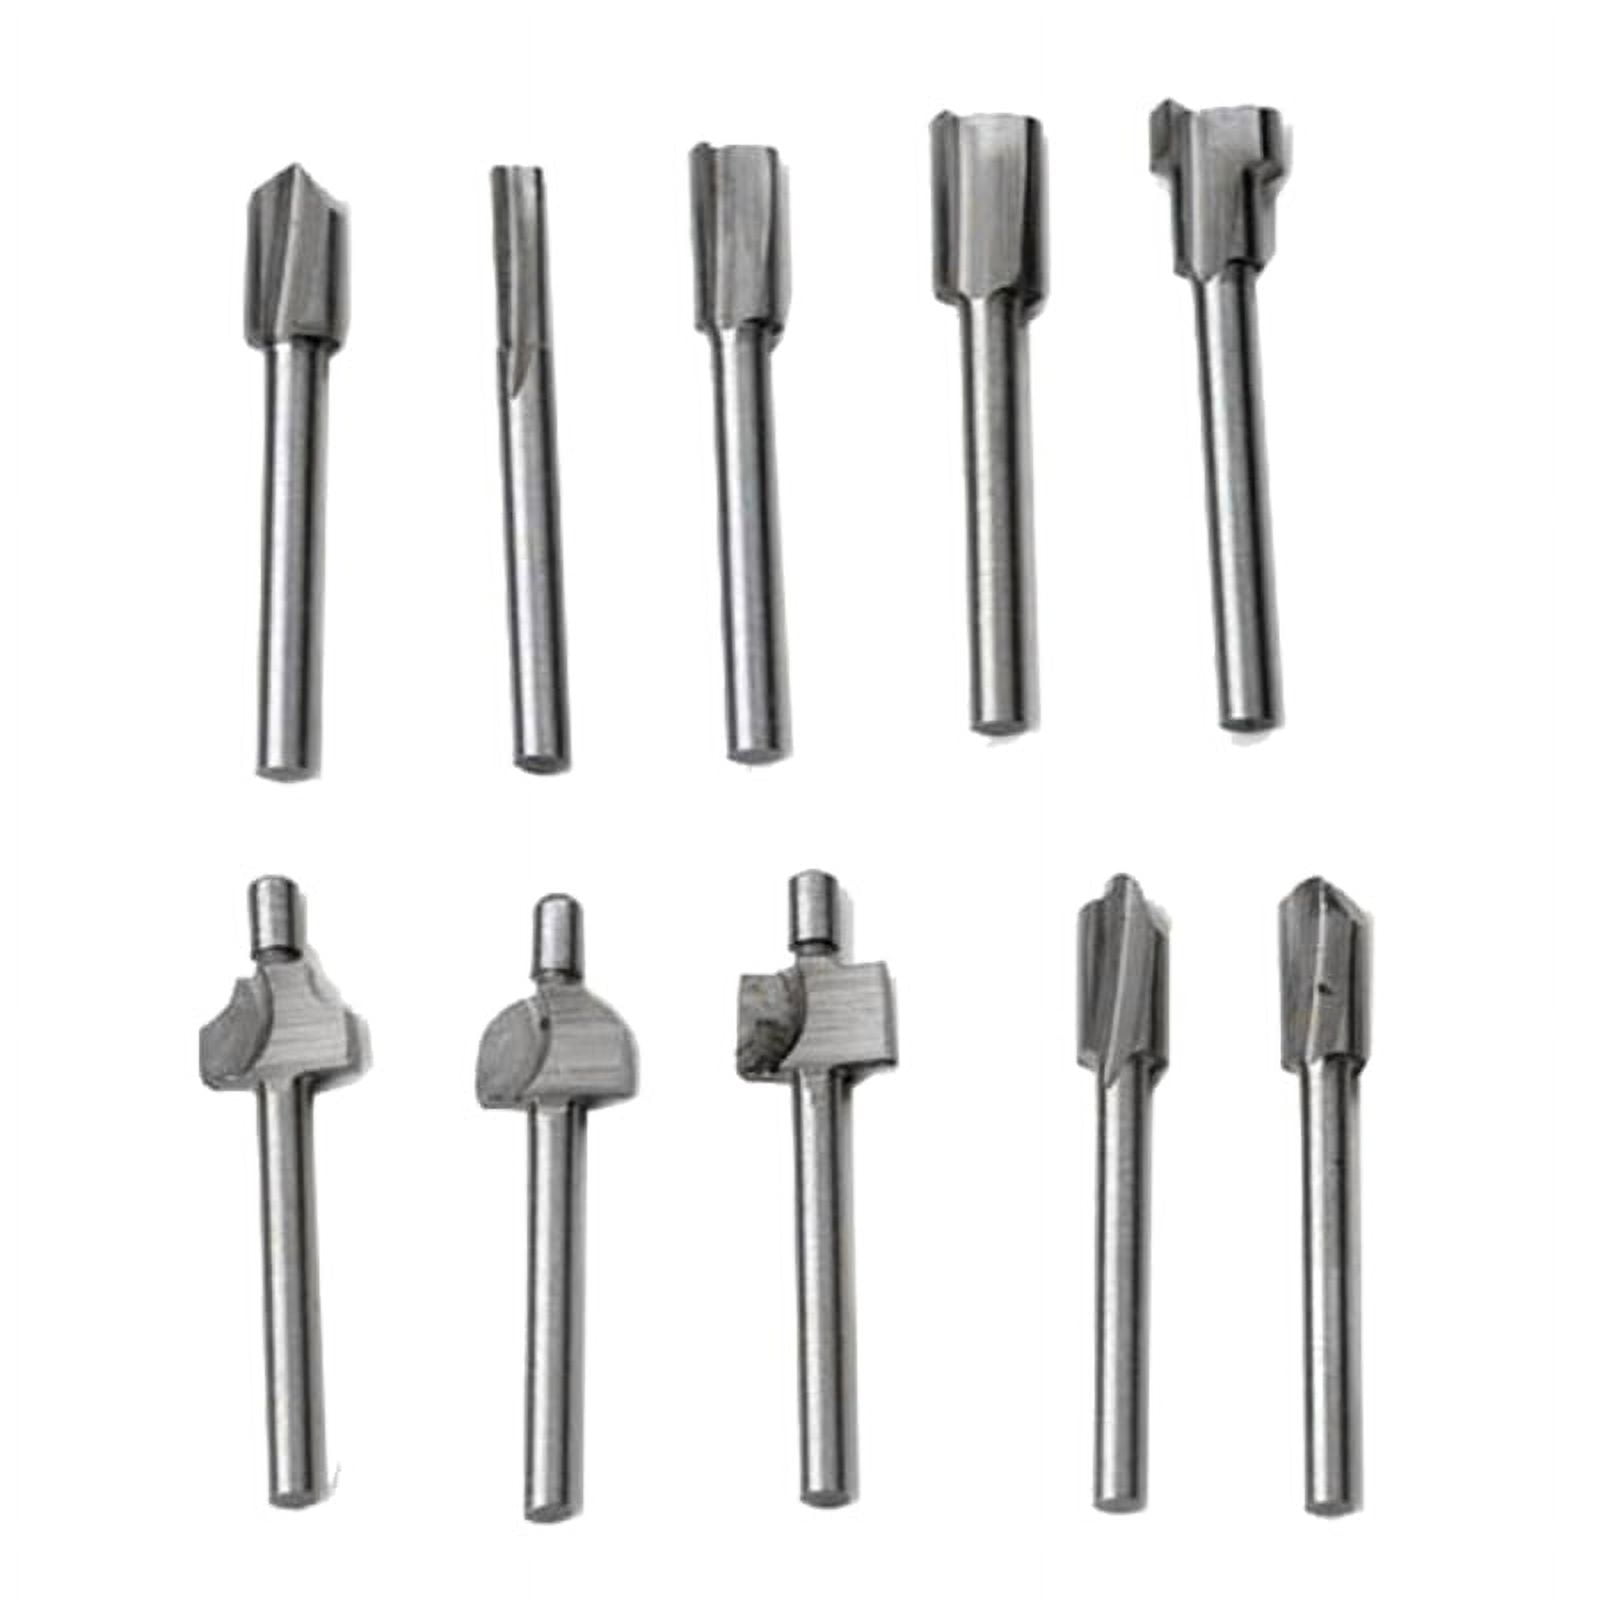 7pc Wood Carving Tools,1/8inch Hss Engraving Drill Tool Wood